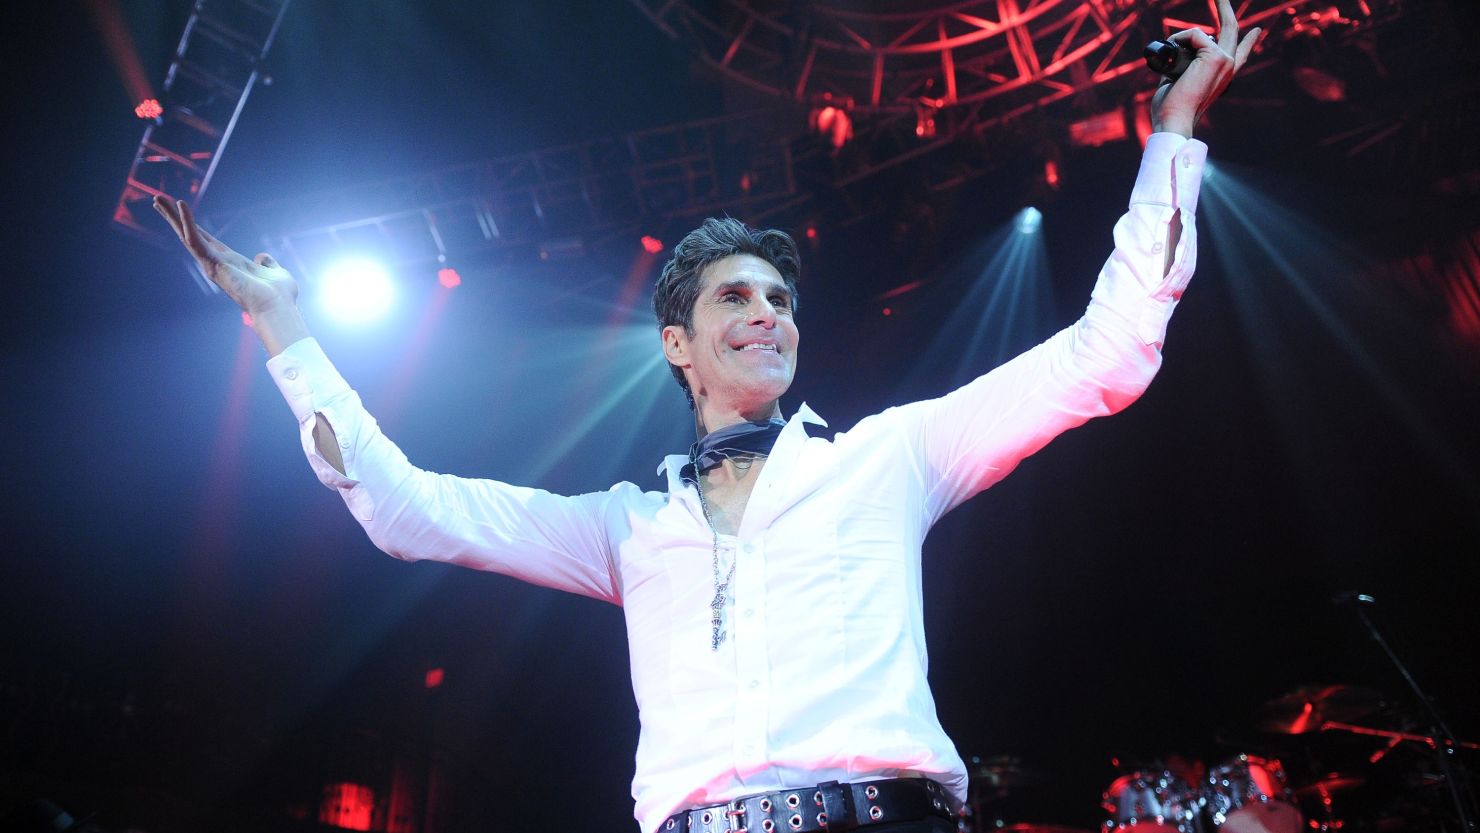 Perry Farrell, the founder of Lollapalooza, says this year's event will "take it up a notch, and we're taking it to four in the morning."